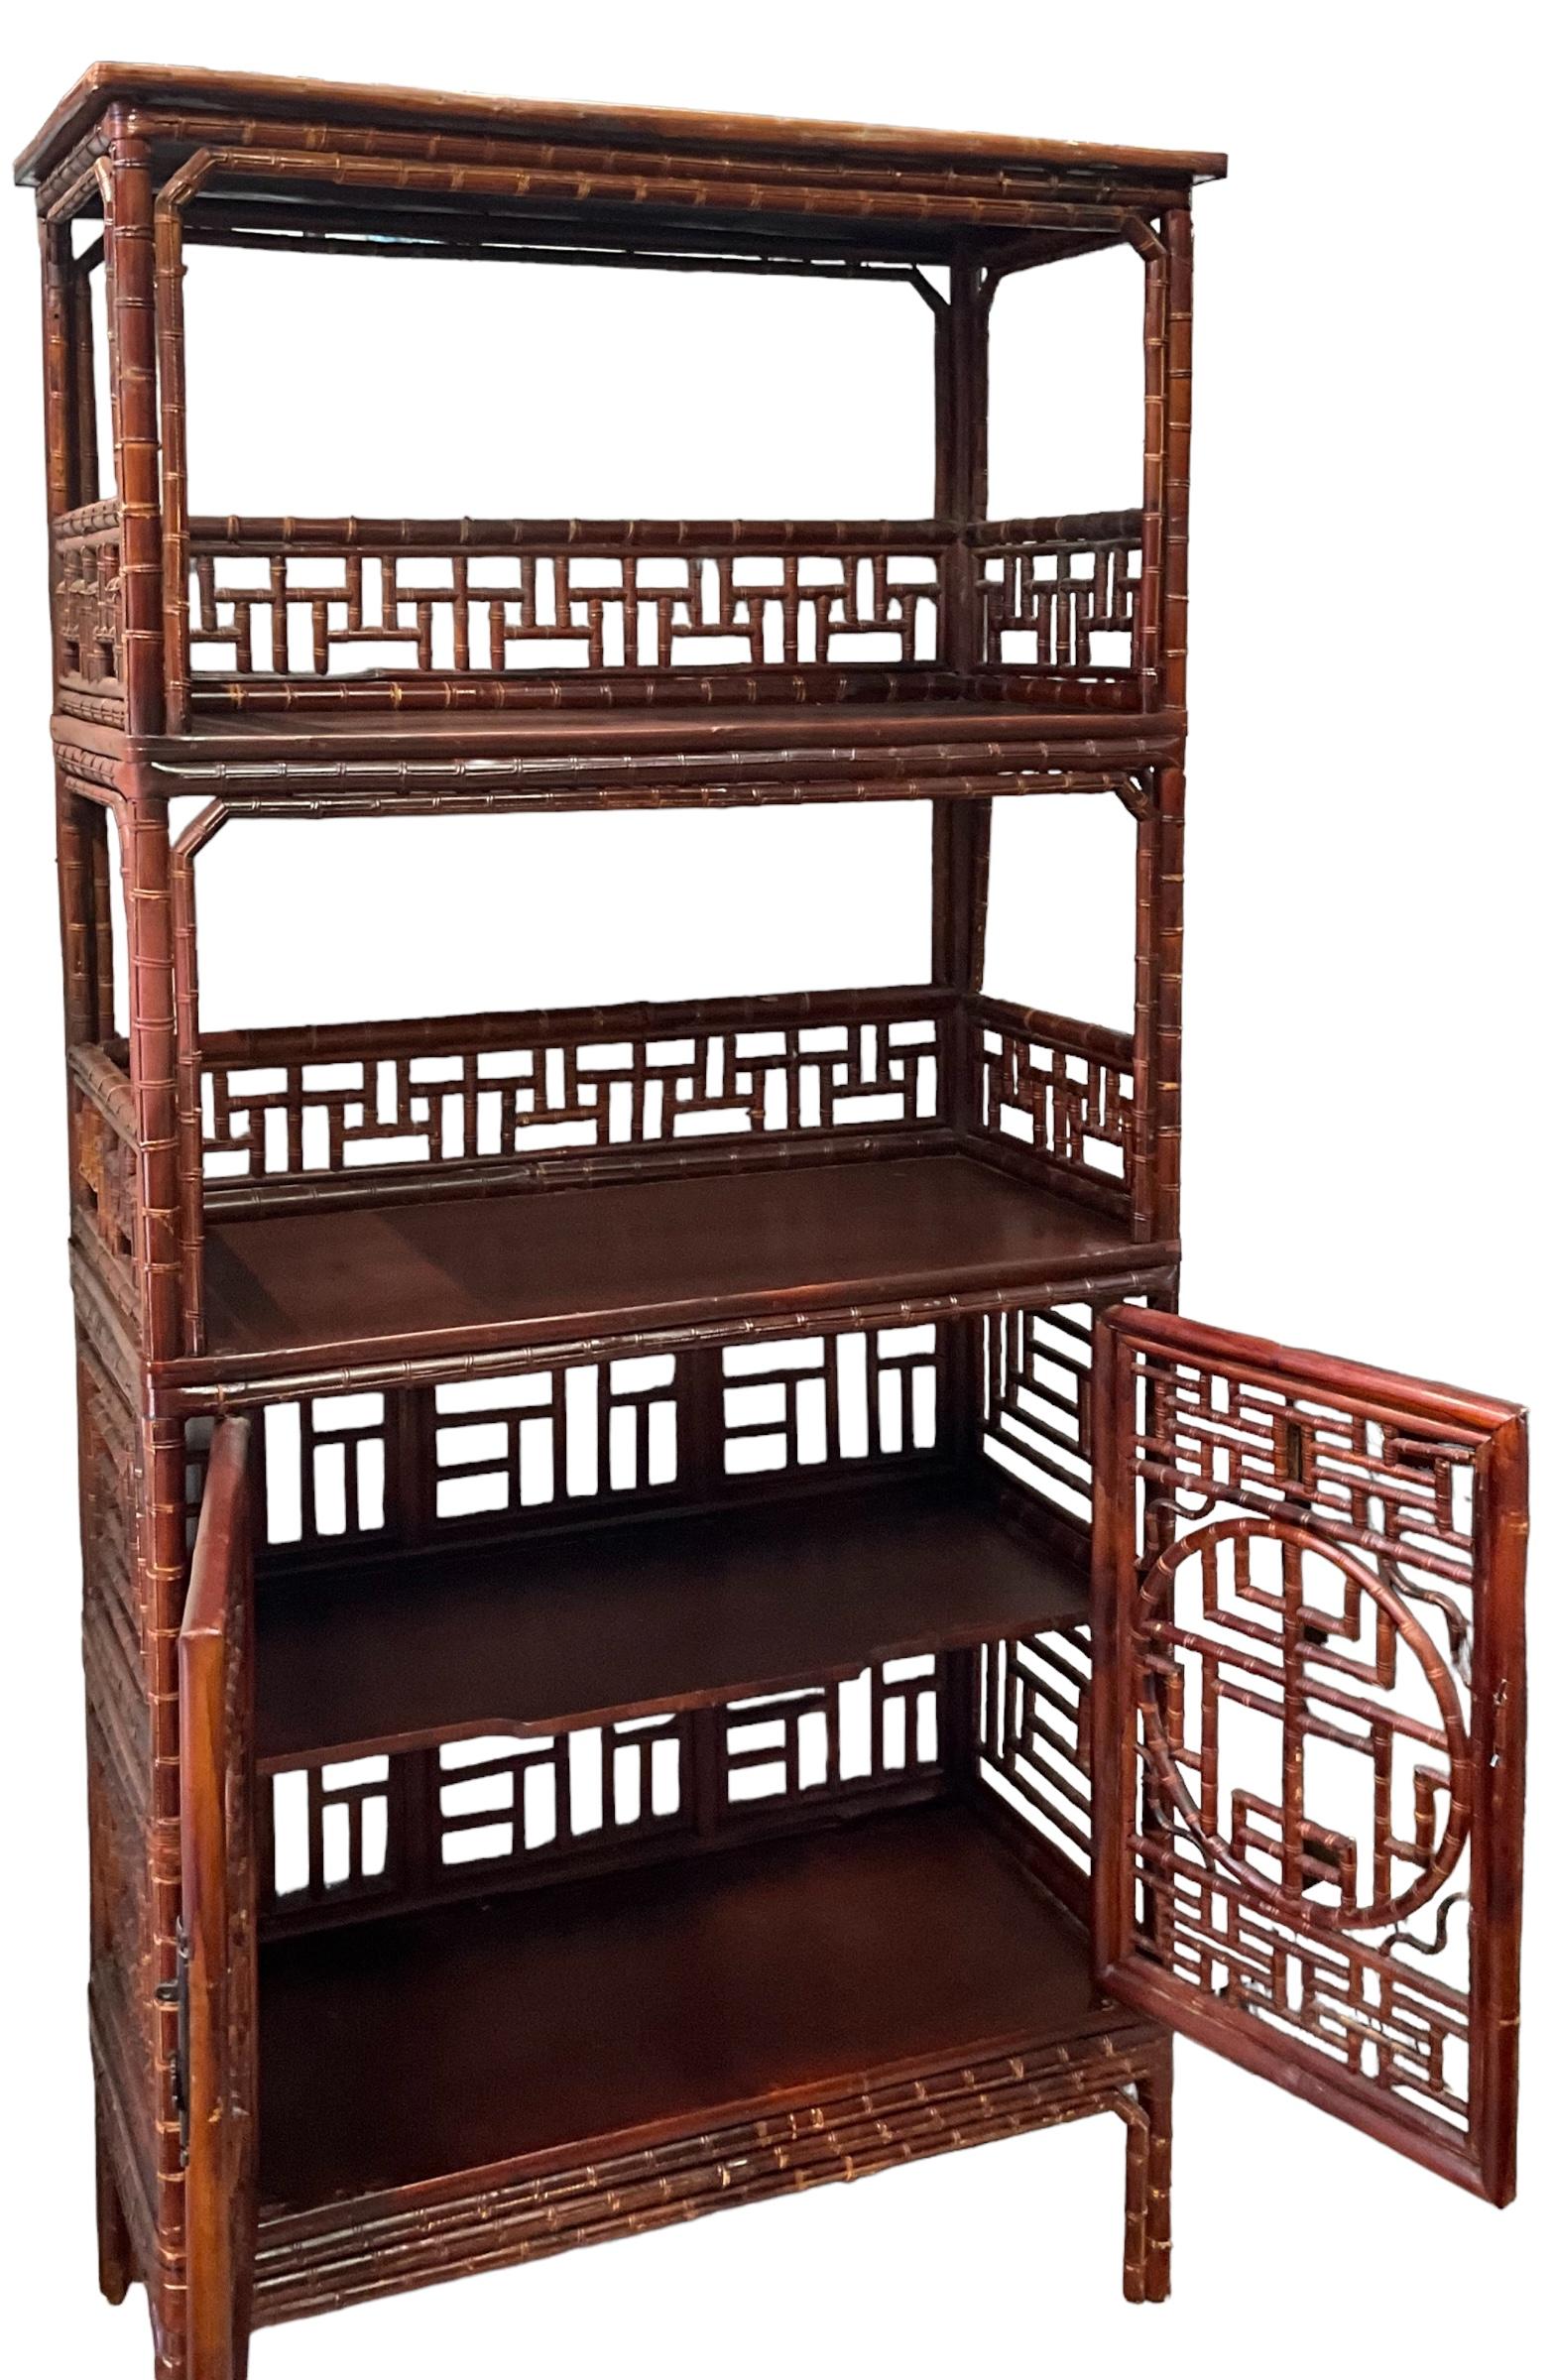 Aesthetic Movement Early 20th-C. Chinese Bamboo Cabinet / Etagere / Bookcase With Ornate Fretwork 